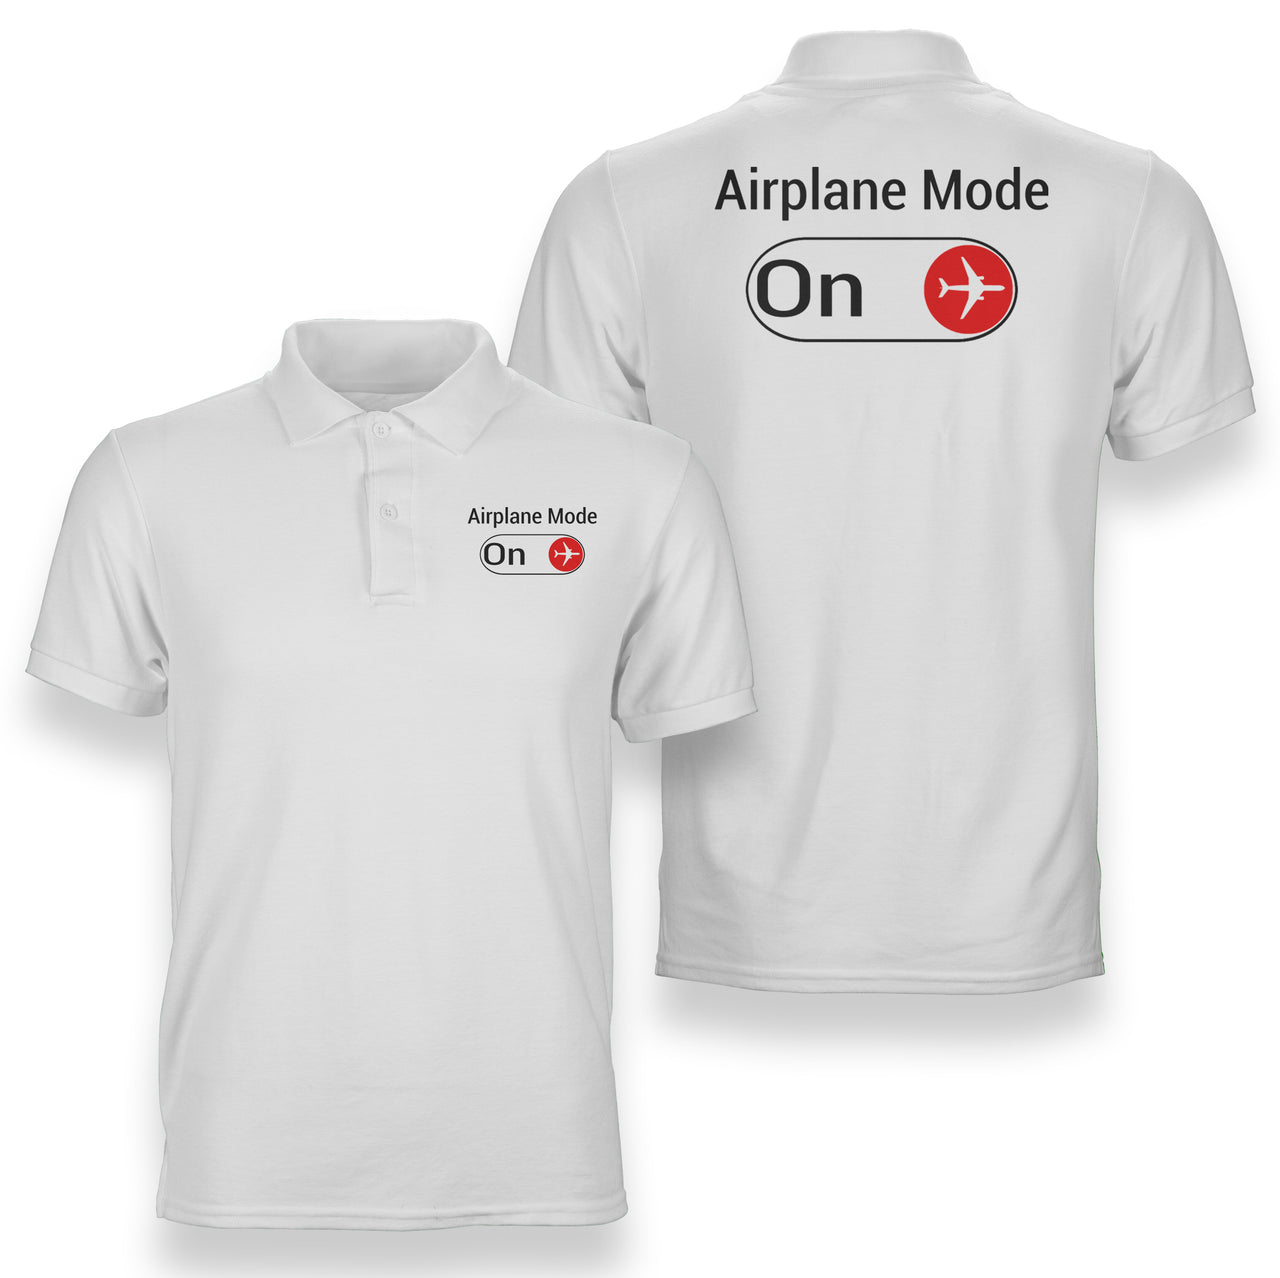 Airplane Mode On Designed Double Side Polo T-Shirts